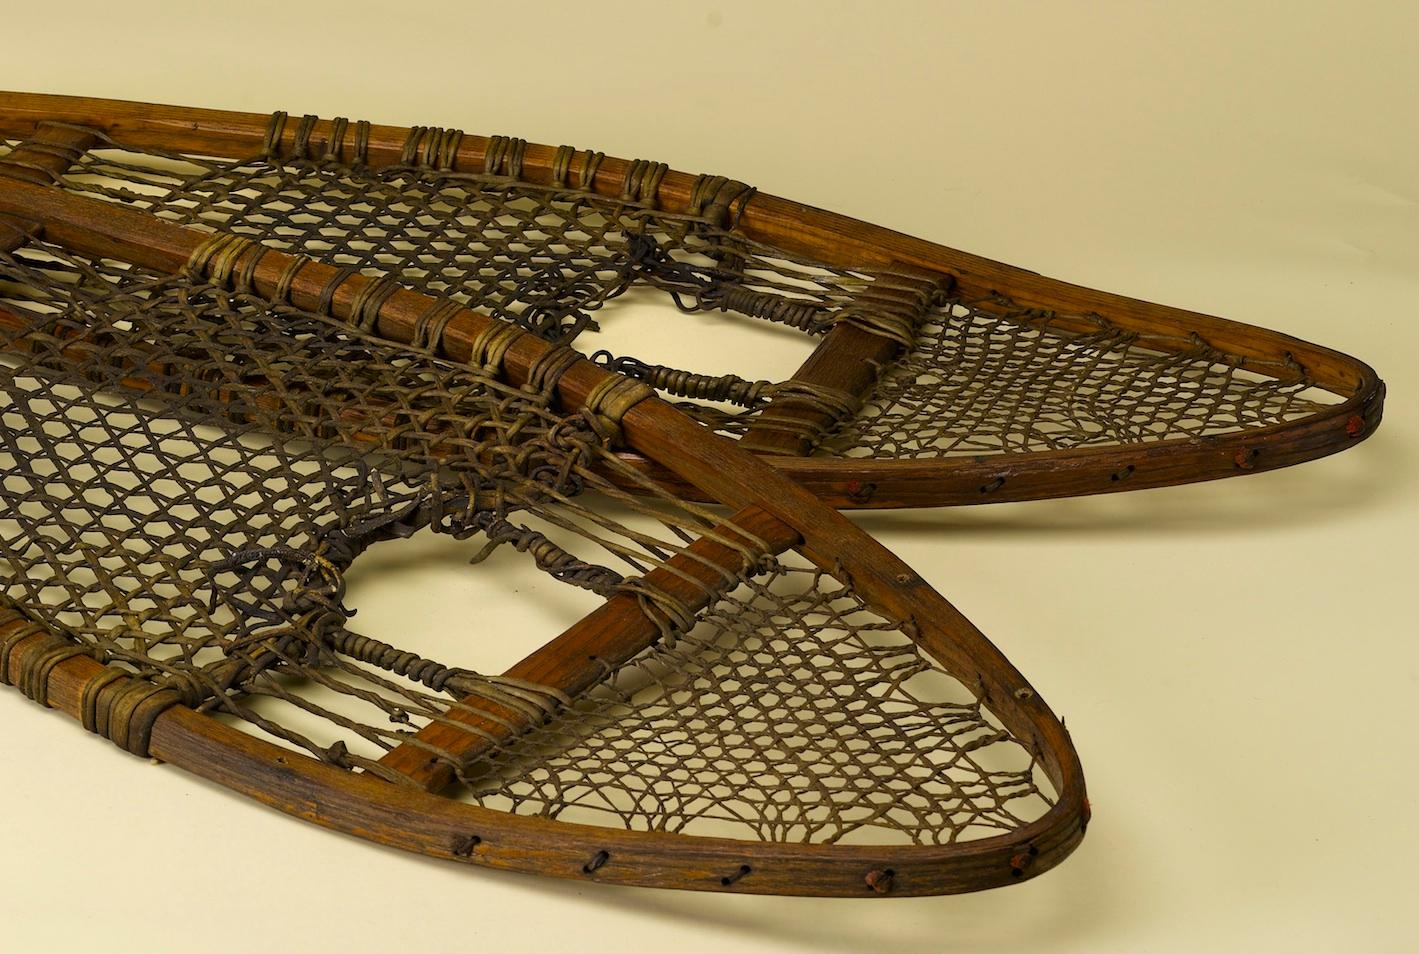 This intriguing pair of snowshoes dates to circa 1930s. Each shoe has a wooden frame and a complicated weave of rawhide to allow an individual to effectively strap into the snowshoe and maneuver across winter terrain. 

Shaped into the Huron style,